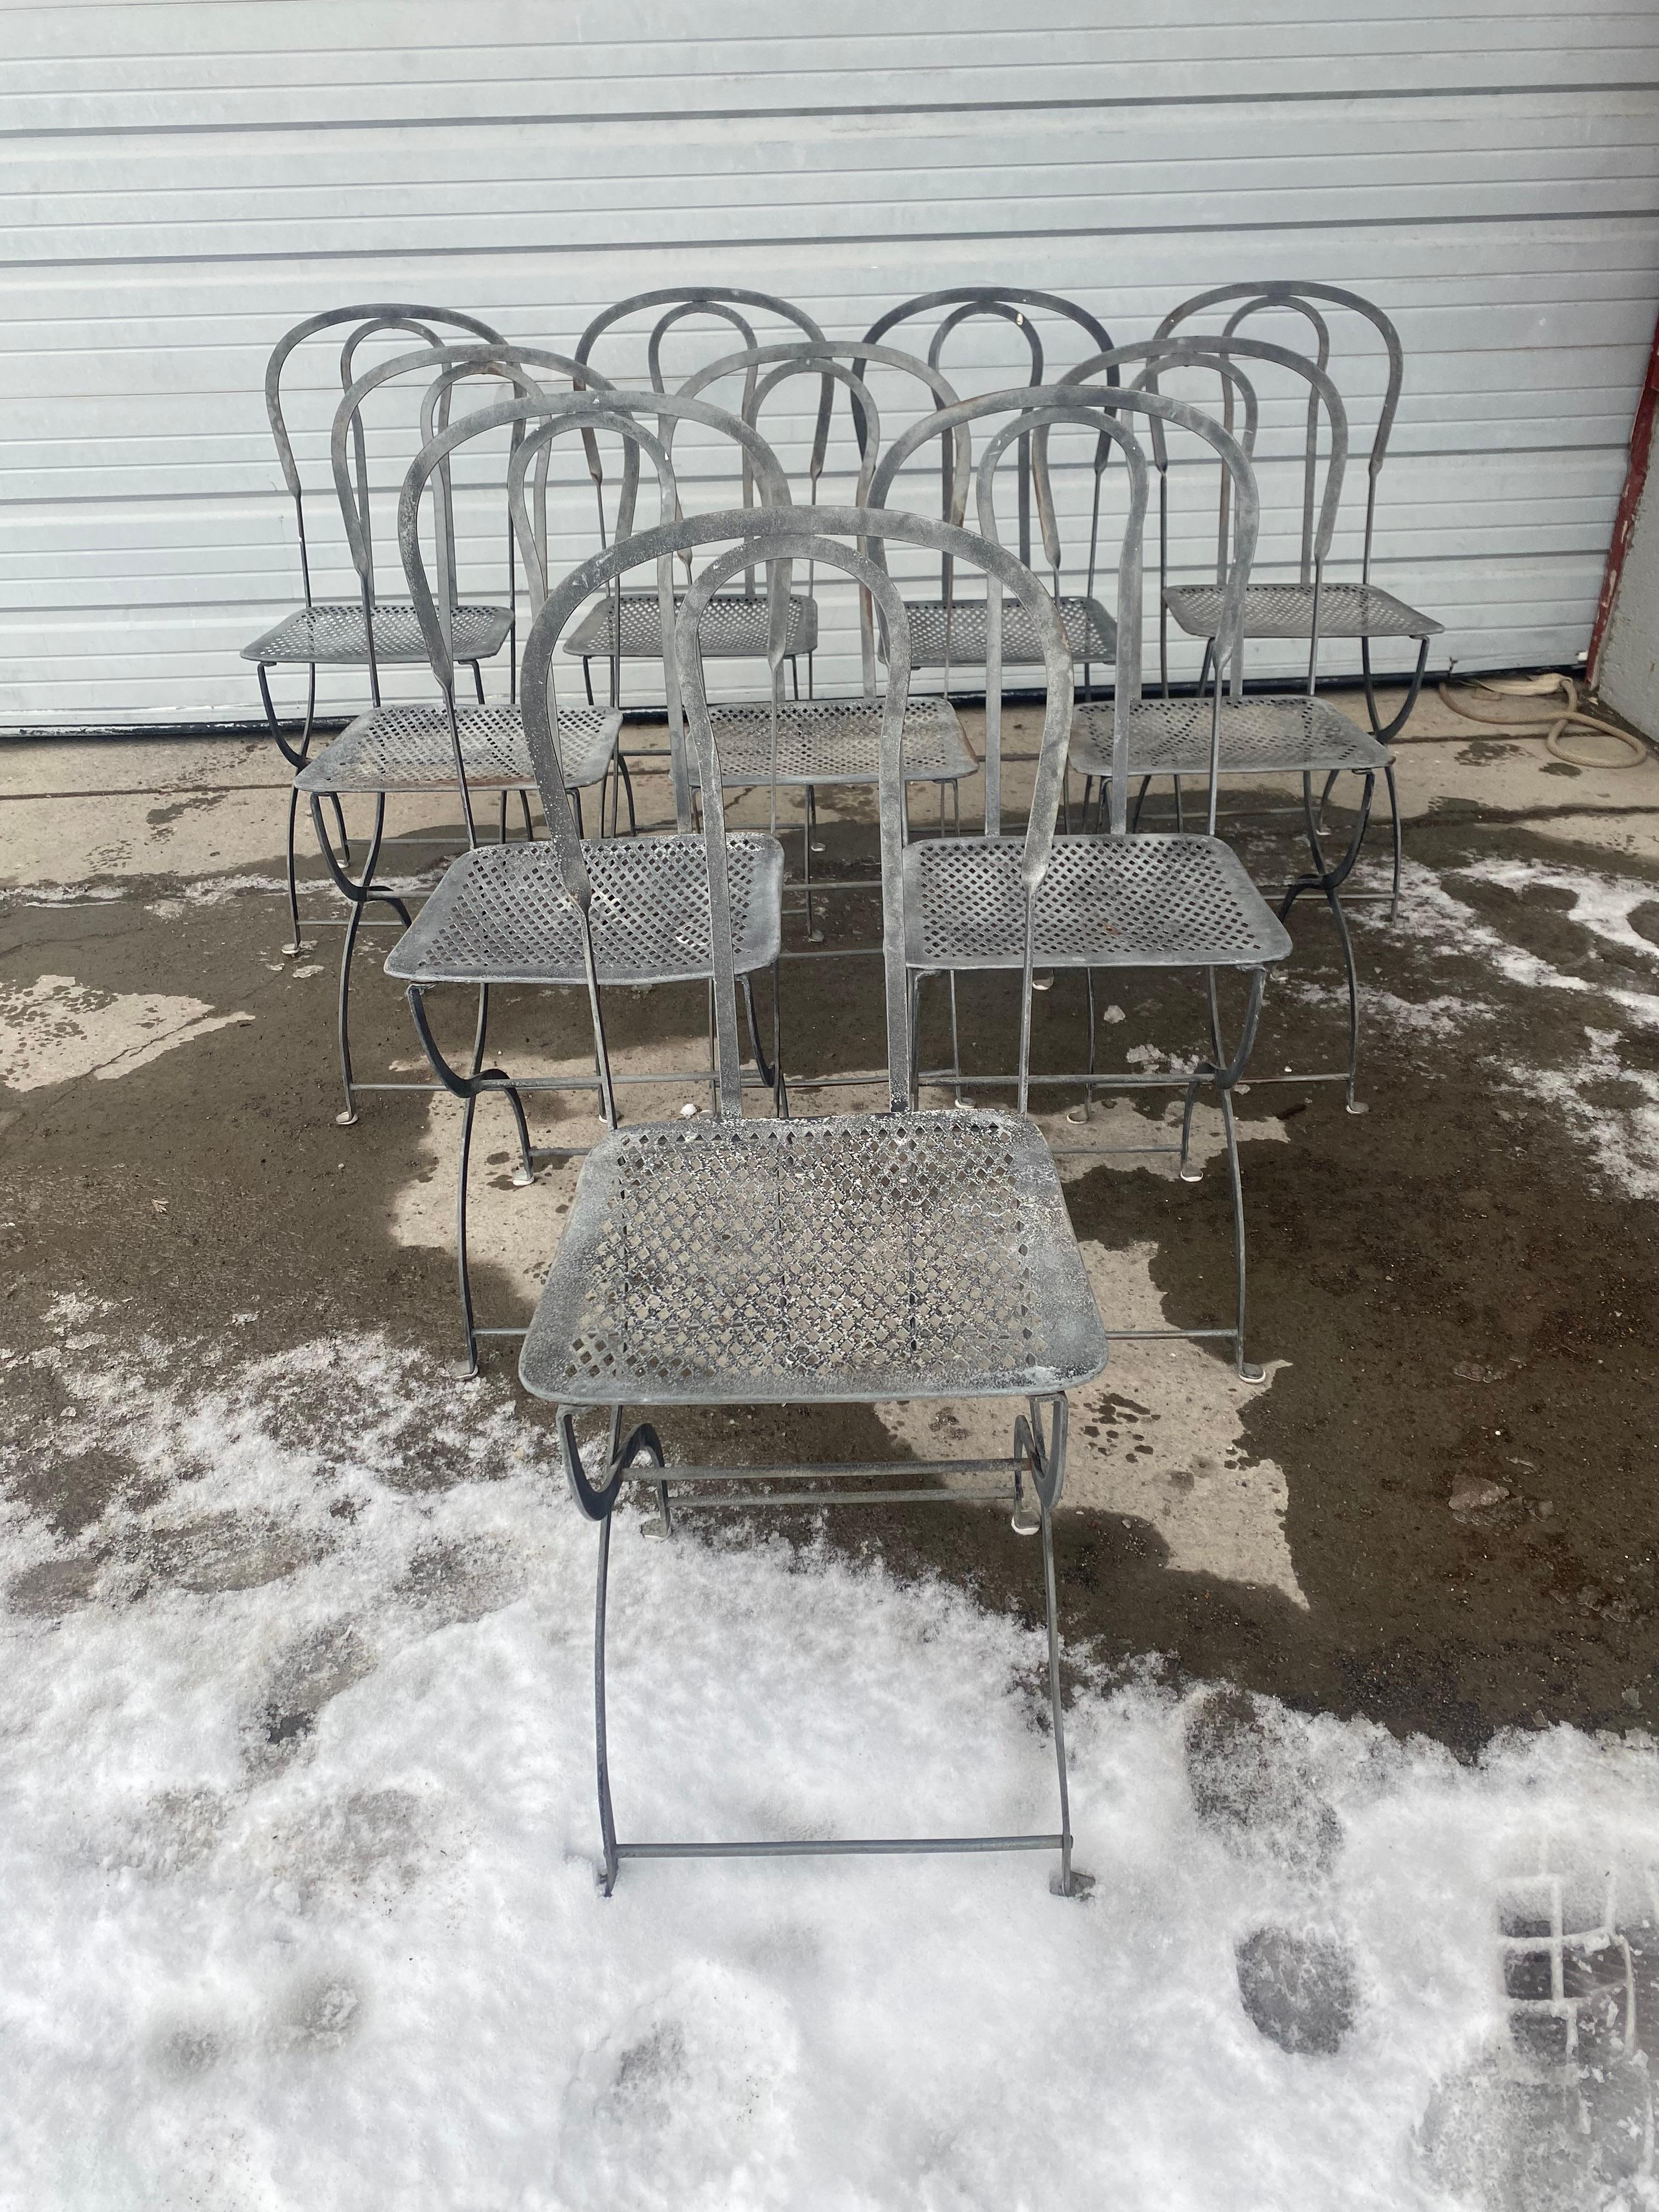 Set 10 Iron / Metal French Bistro Cafe Chairs.. Classic Design..Wonderful patina..color,,finish,, Extremelly comfortable. Hand delivery avail to New York City or anywhere en route from Buffalo NY......*****NOTE**** NOT FOLDING